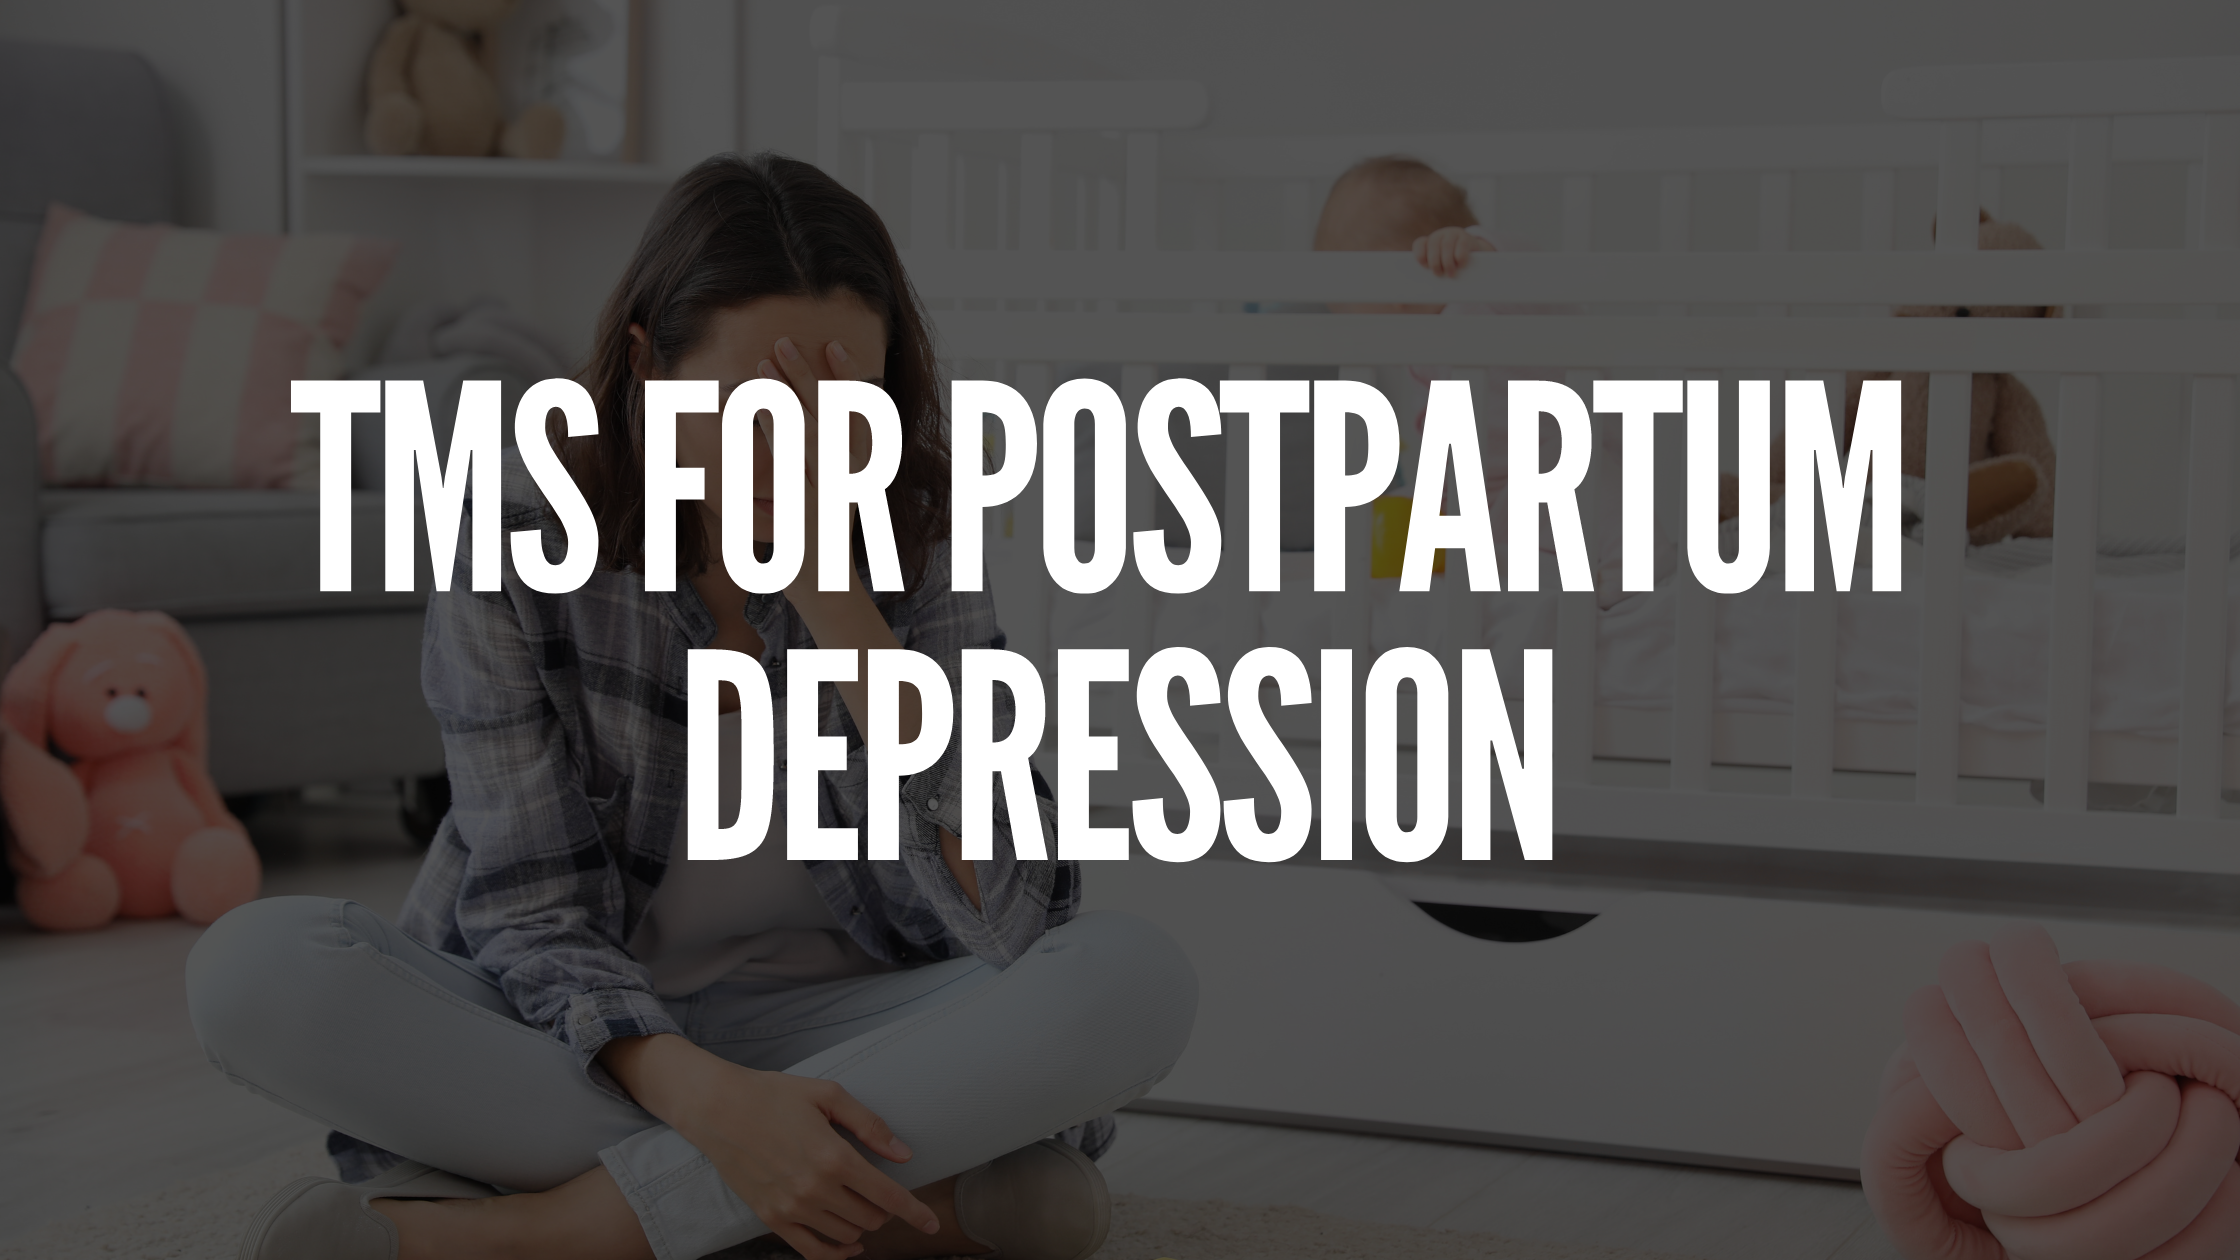 You are currently viewing TMS For Postpartum Depression